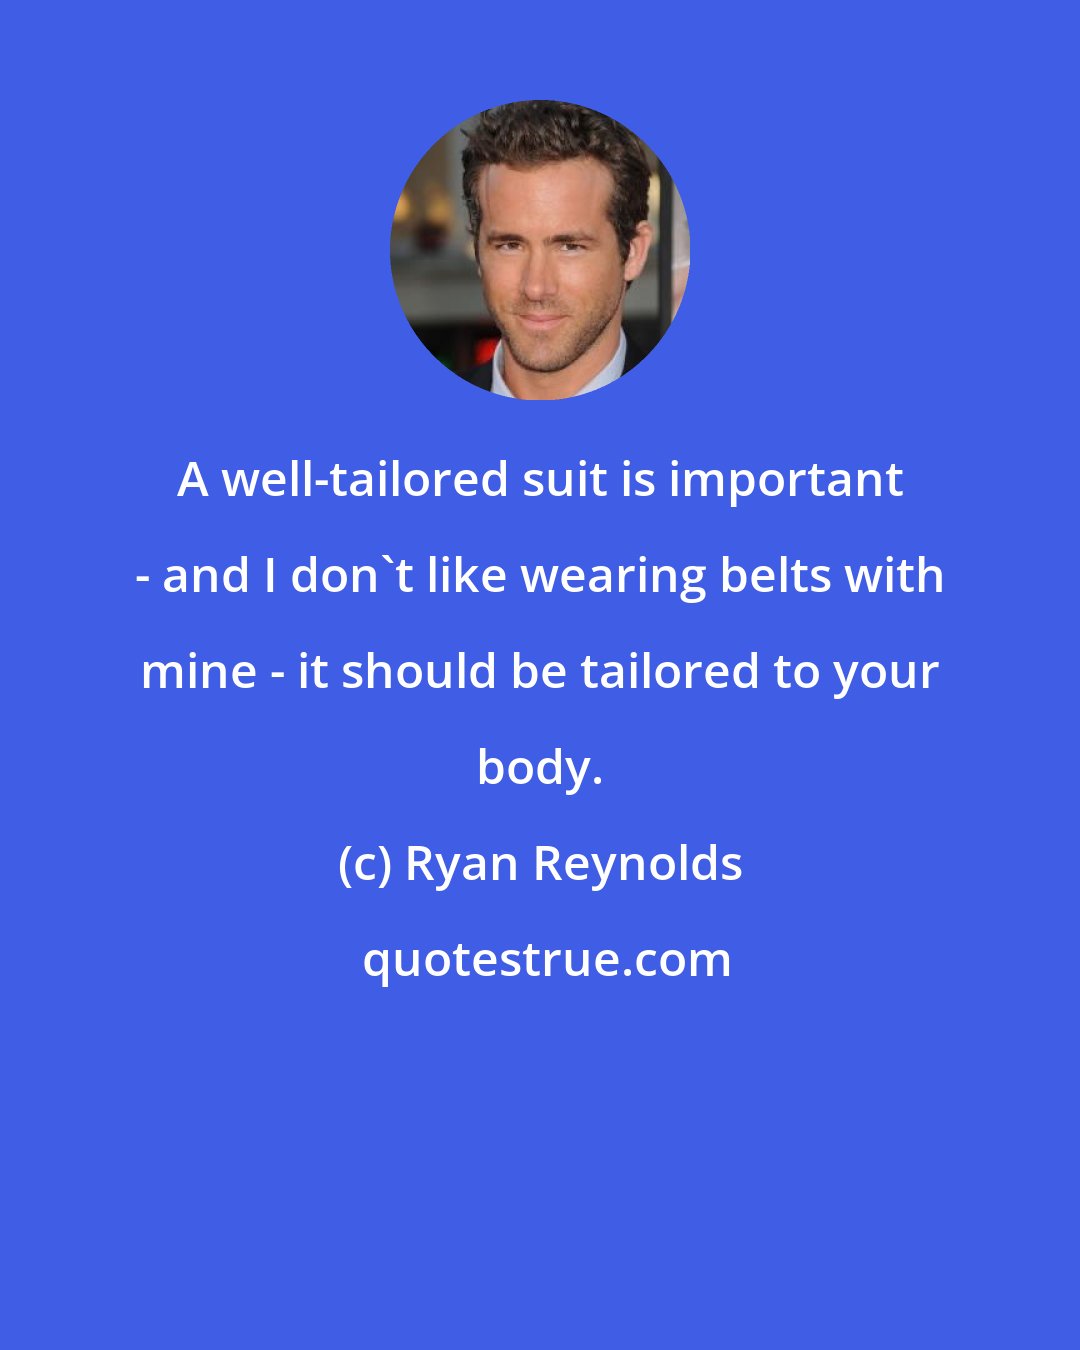 Ryan Reynolds: A well-tailored suit is important - and I don't like wearing belts with mine - it should be tailored to your body.